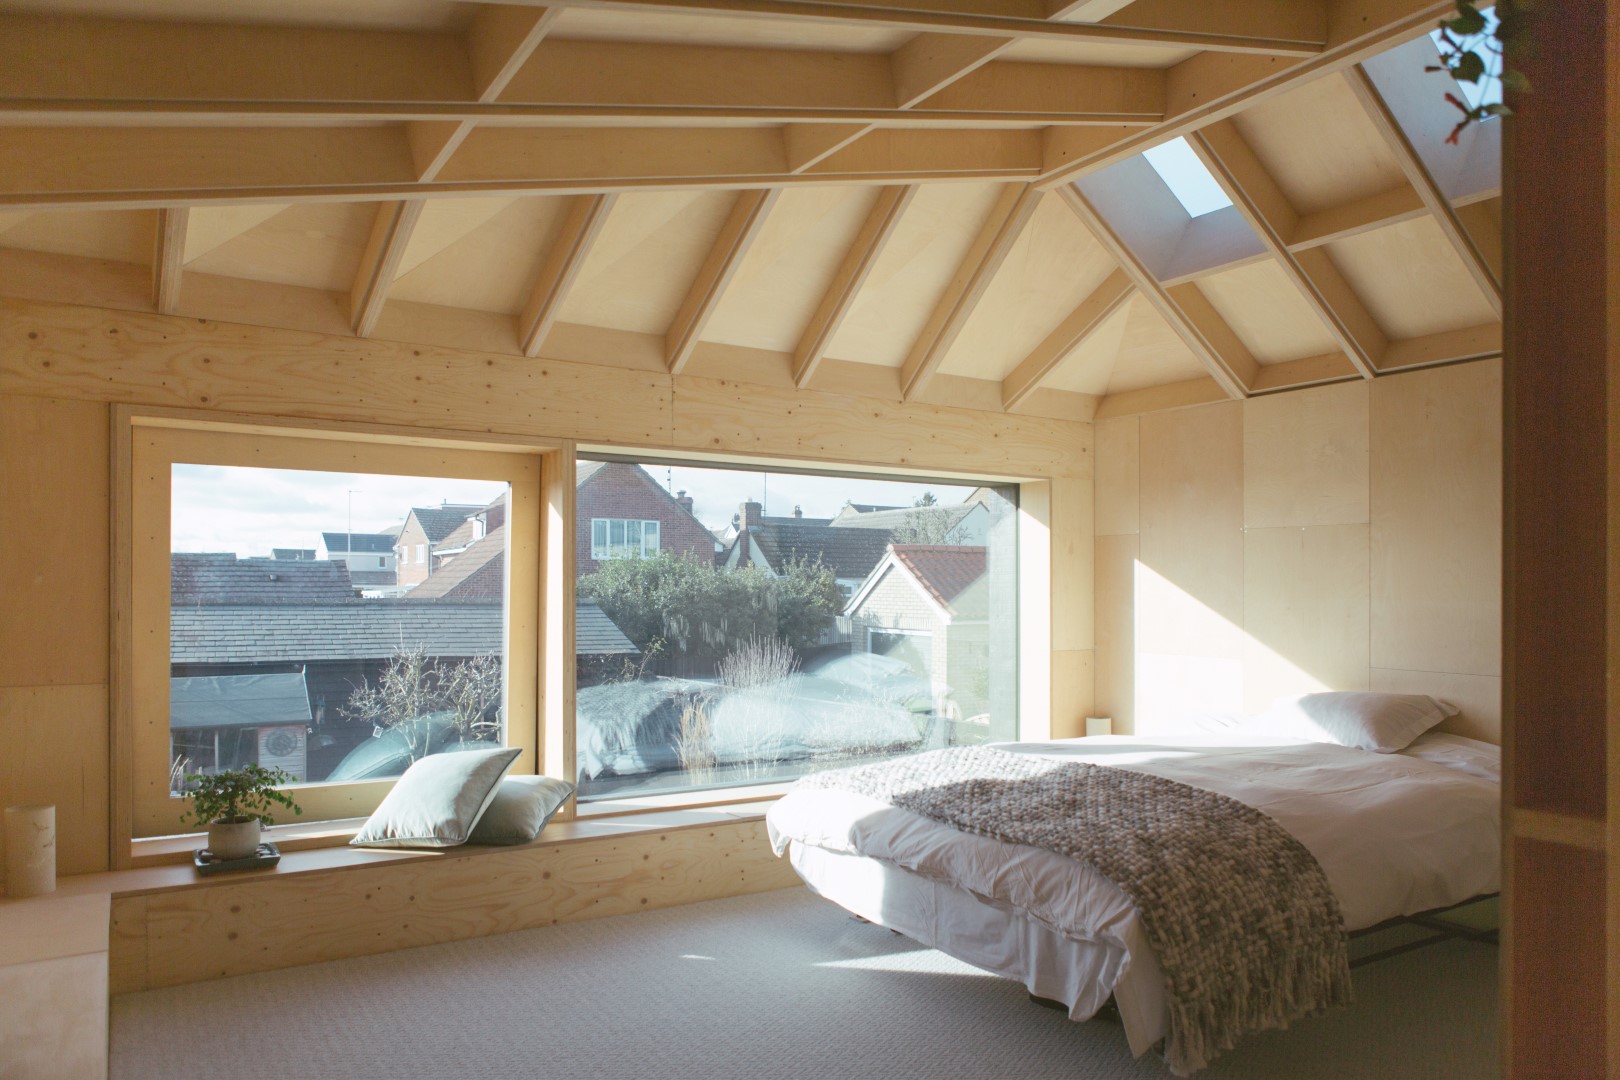 A bespoke built bedroom with wooden walls, large windows and skylight